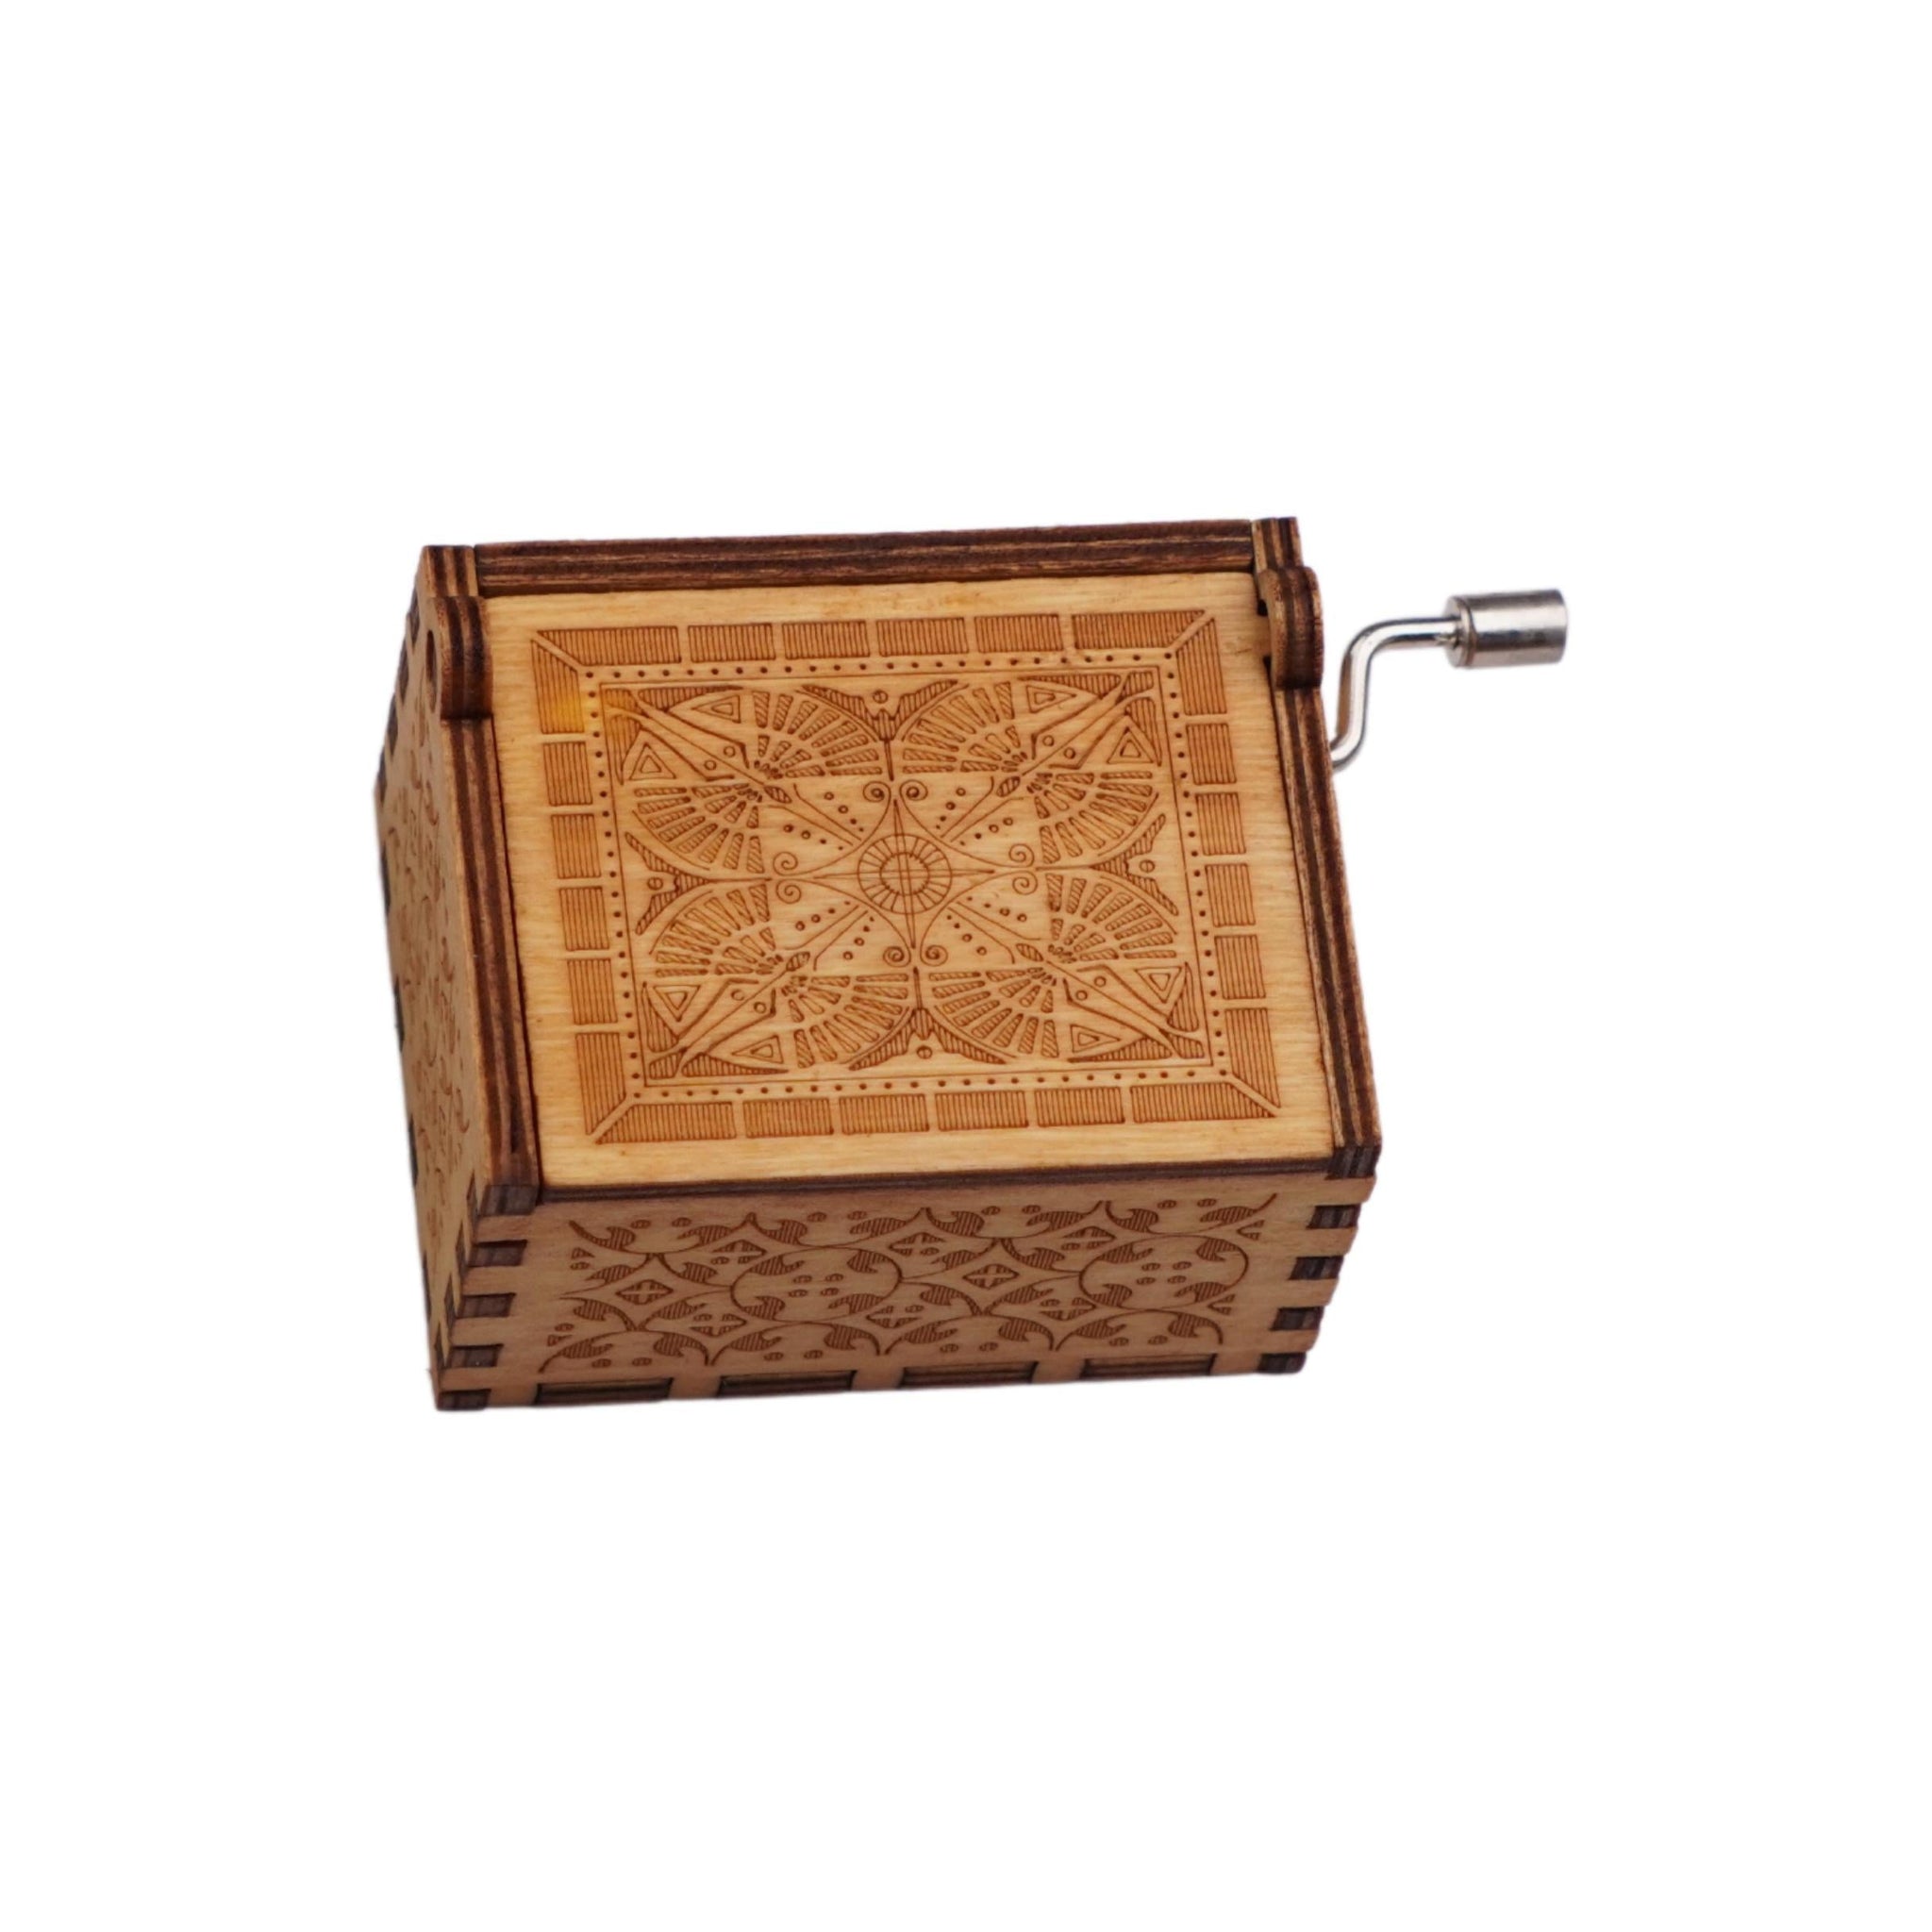 Anime: Naruto Shippuden Wooden Hand cranked Engraved Music Box